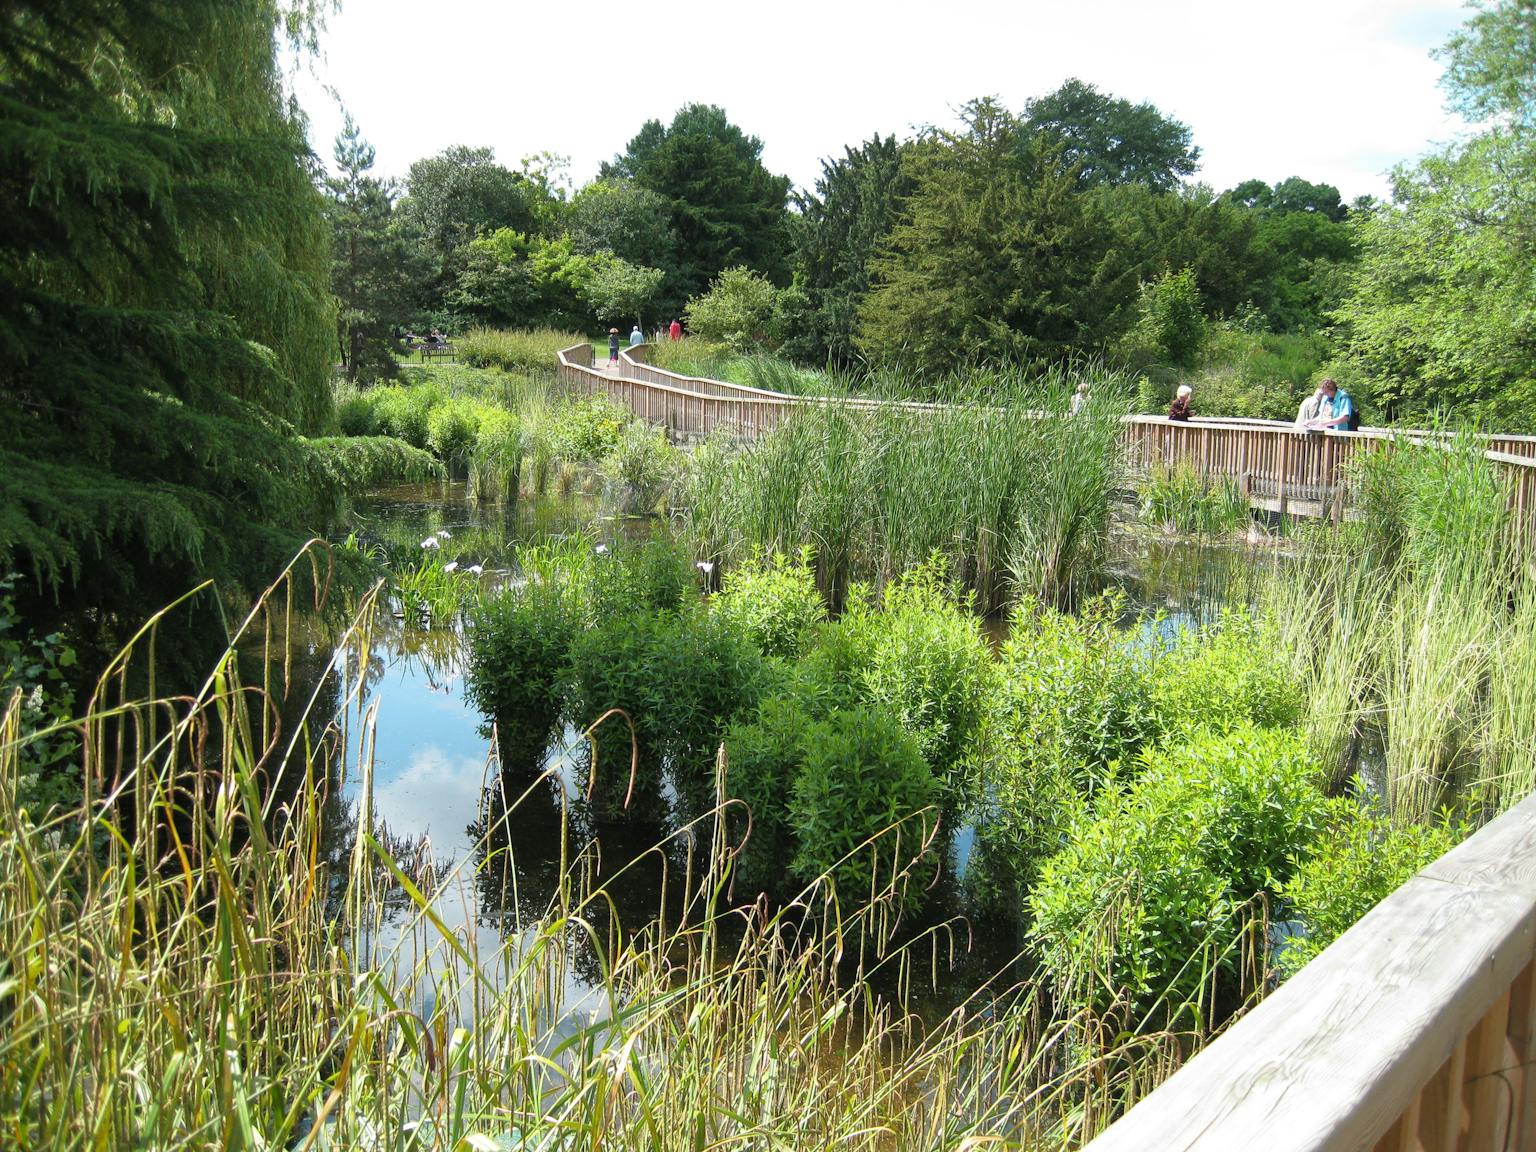 Nature reserve with wooden walkway, foliage and water